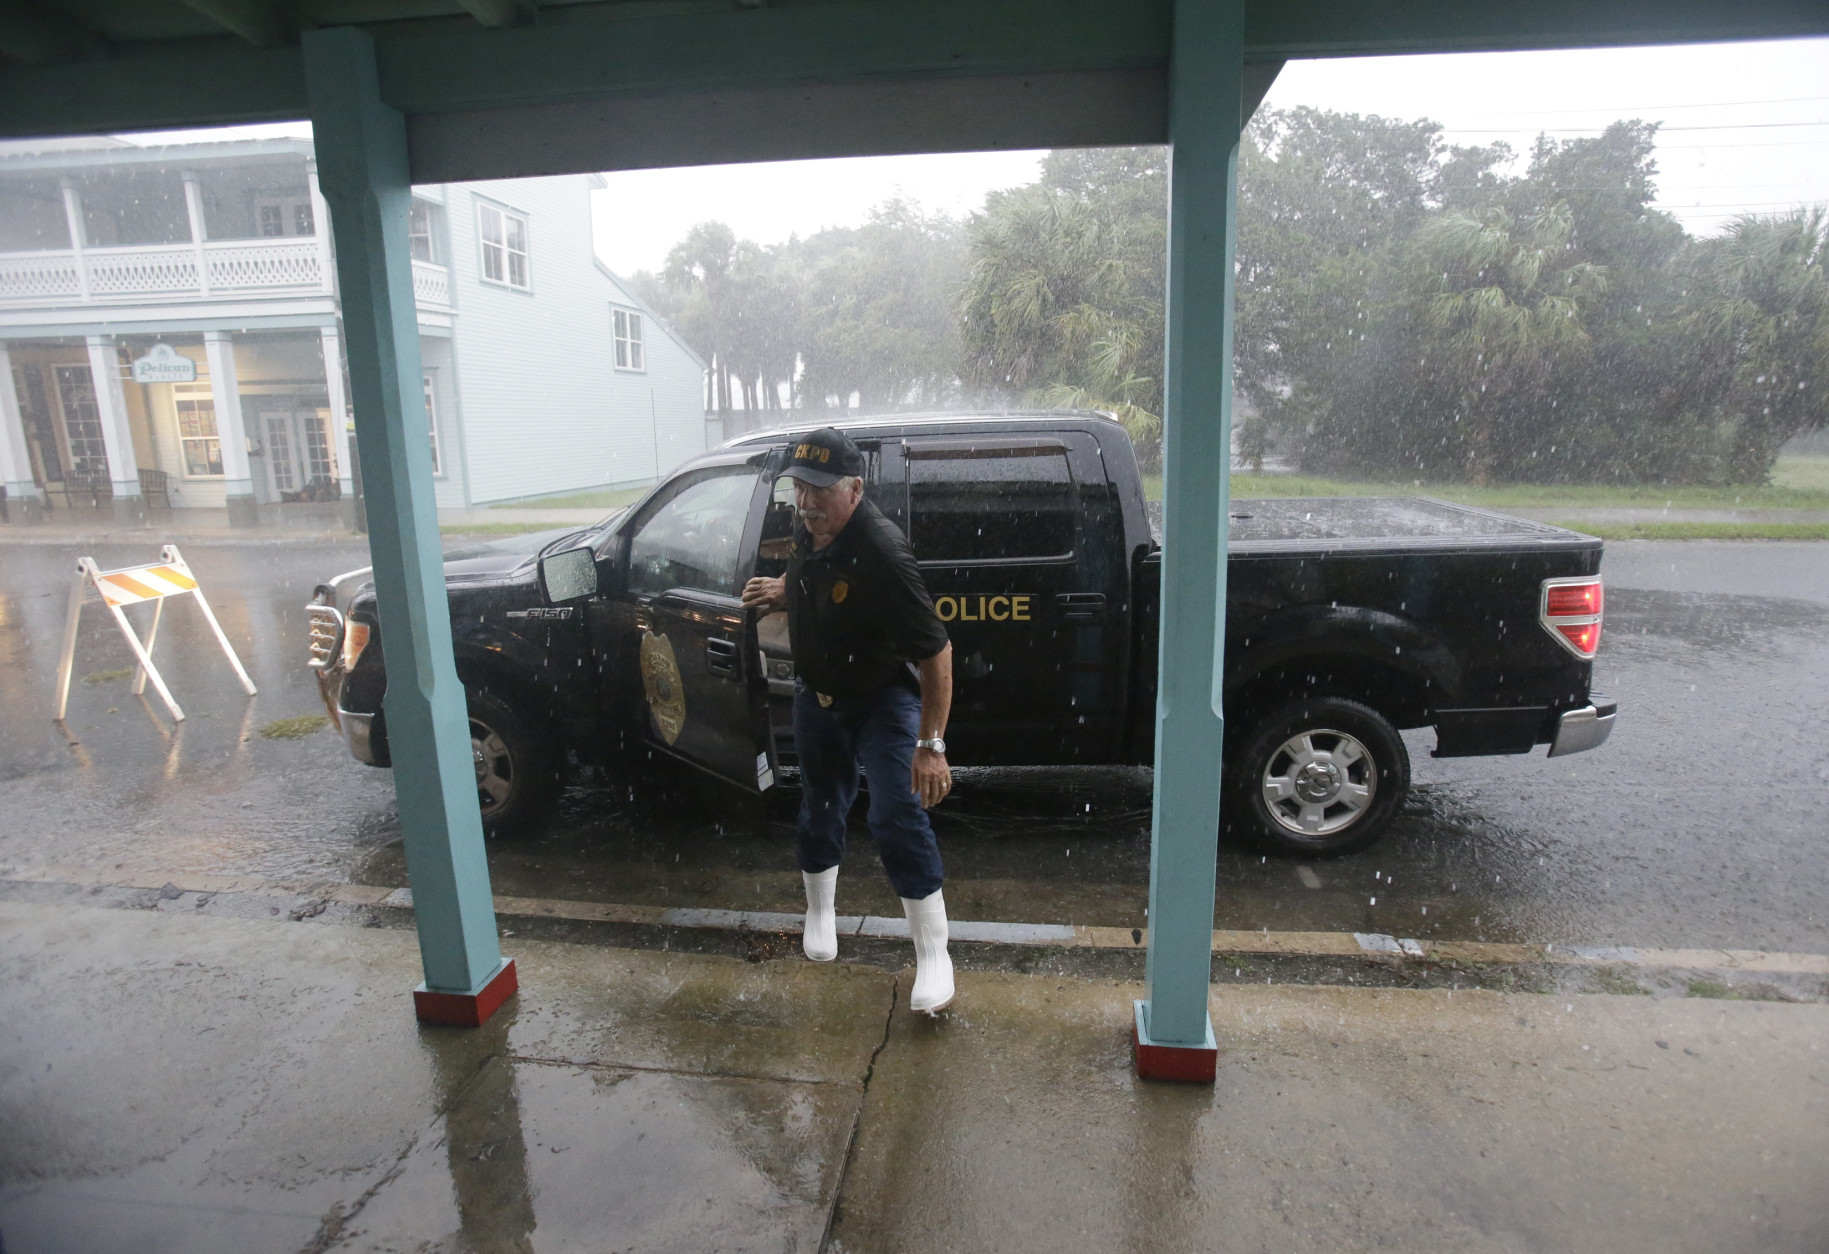 Cedar Key police chief Virgil Sandlin checks on the downtown area as Hurricane Hermine nears the Florida coast, Thursday, Sept. 1, 2016, in Cedar Key, Fla. Tropical Storm Hermine strengthened into a hurricane Thursday and steamed toward Florida's Gulf Coast, where people put up shutters, nailed plywood across store windows and braced for the first direct hit on the state from a hurricane in over a decade. (AP Photo/John Raoux)